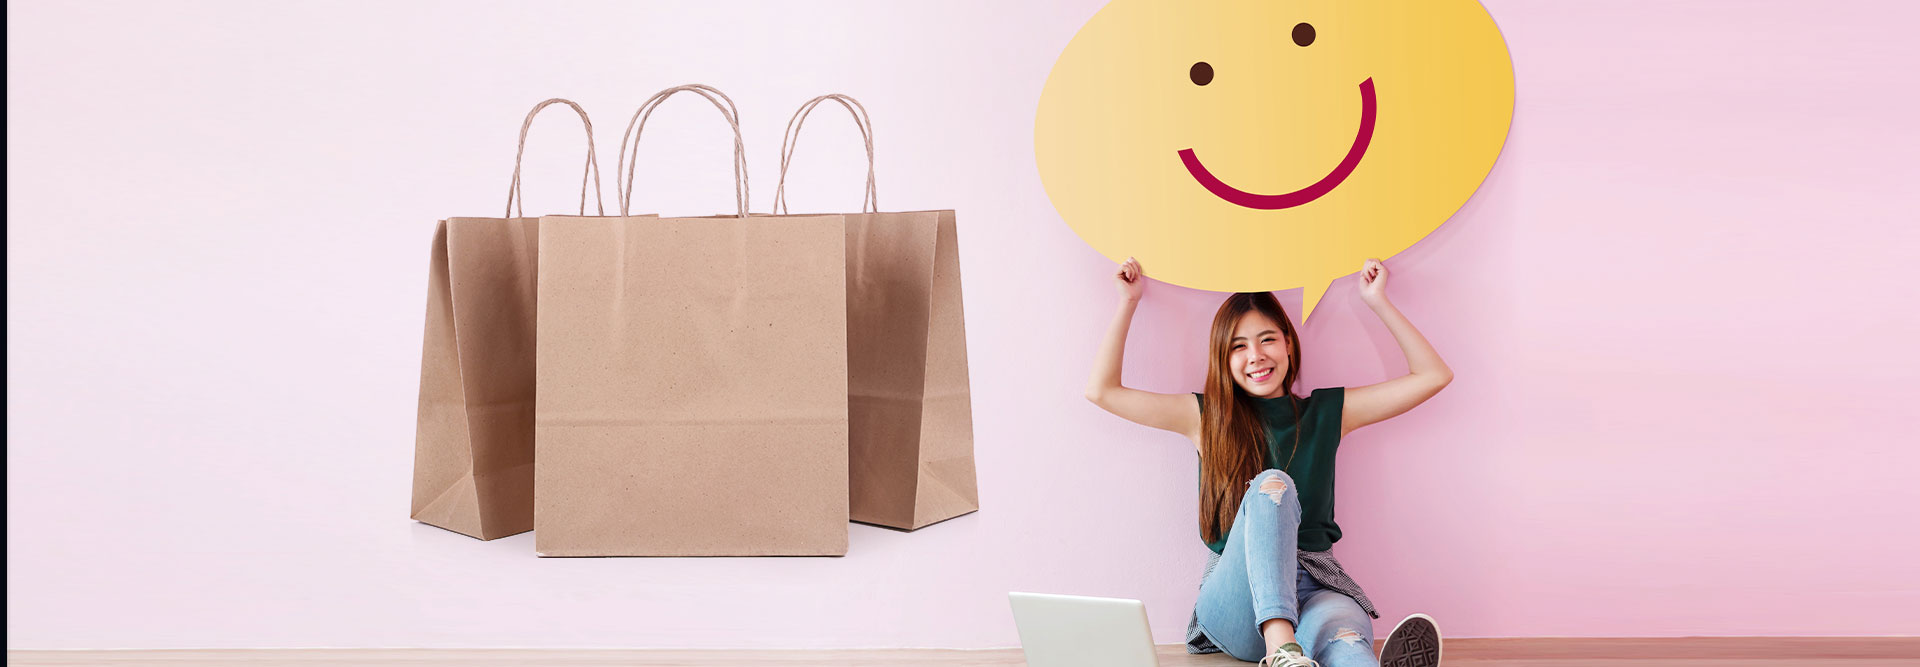 A customer holding a giant yellow happy face, with shopping bags off to the side.